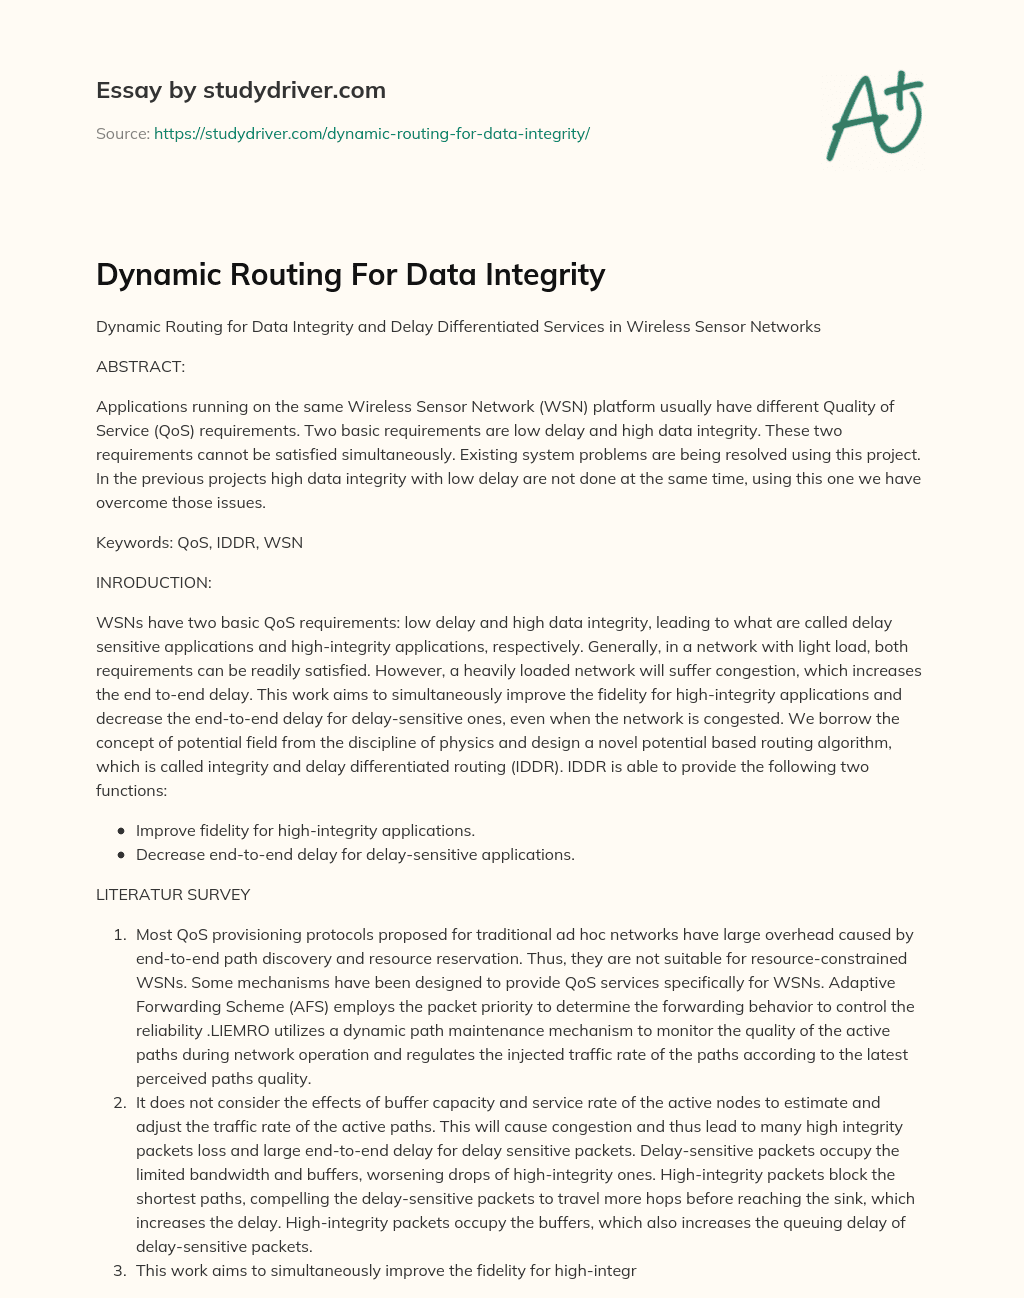 Dynamic Routing for Data Integrity essay